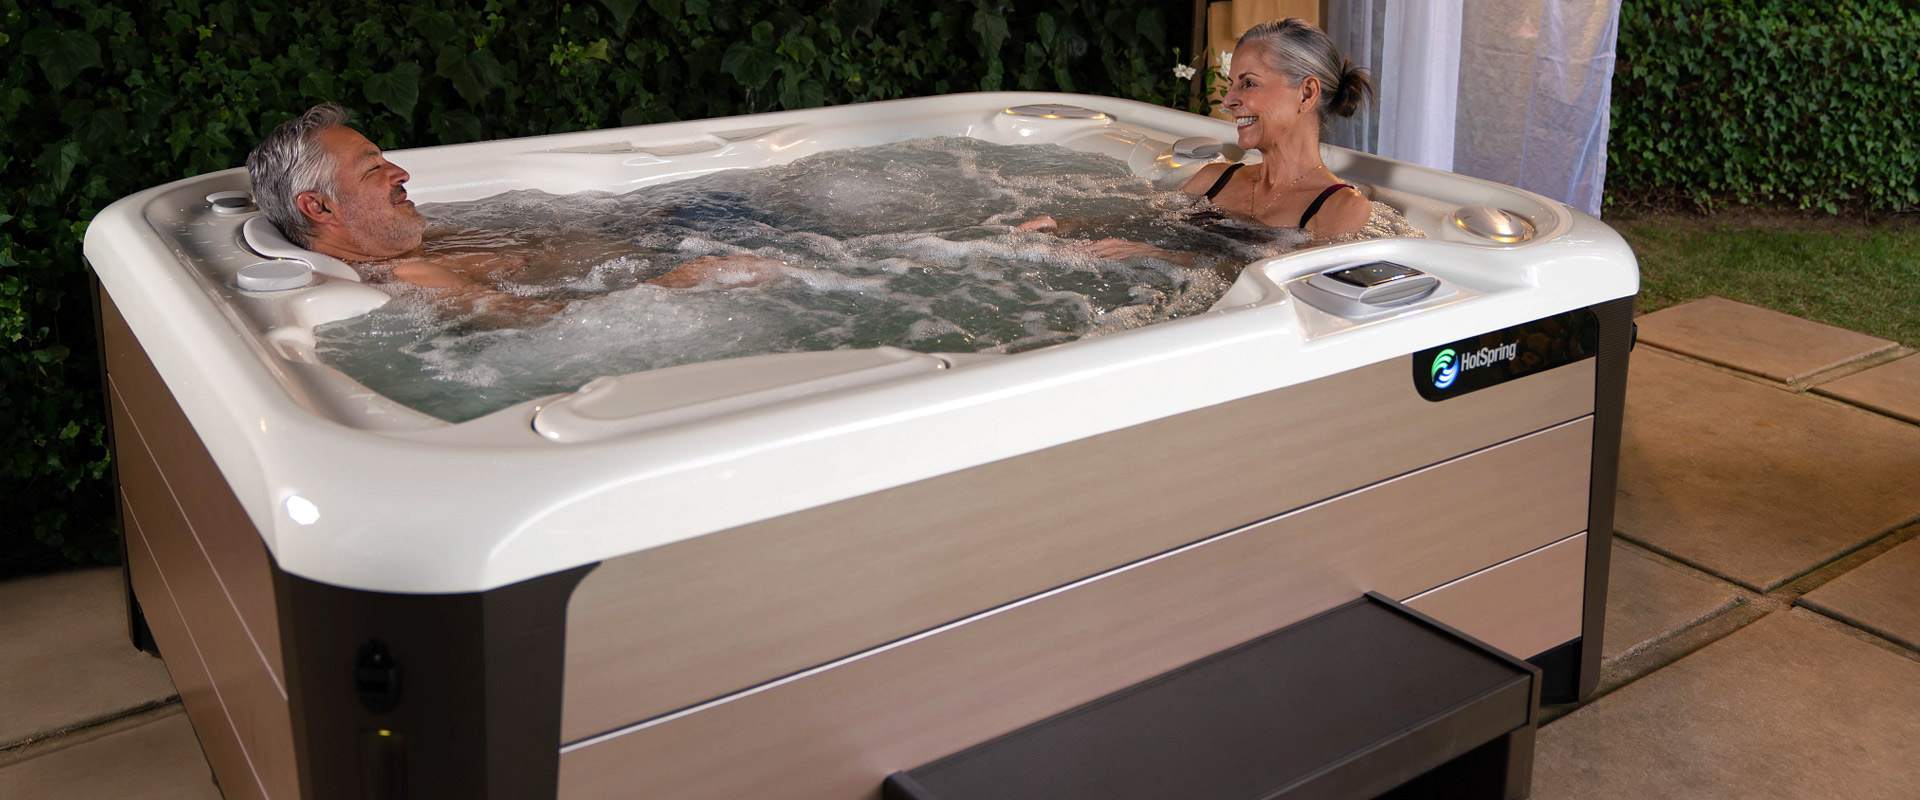 jetsetter lx hot tub for sale in rockford il